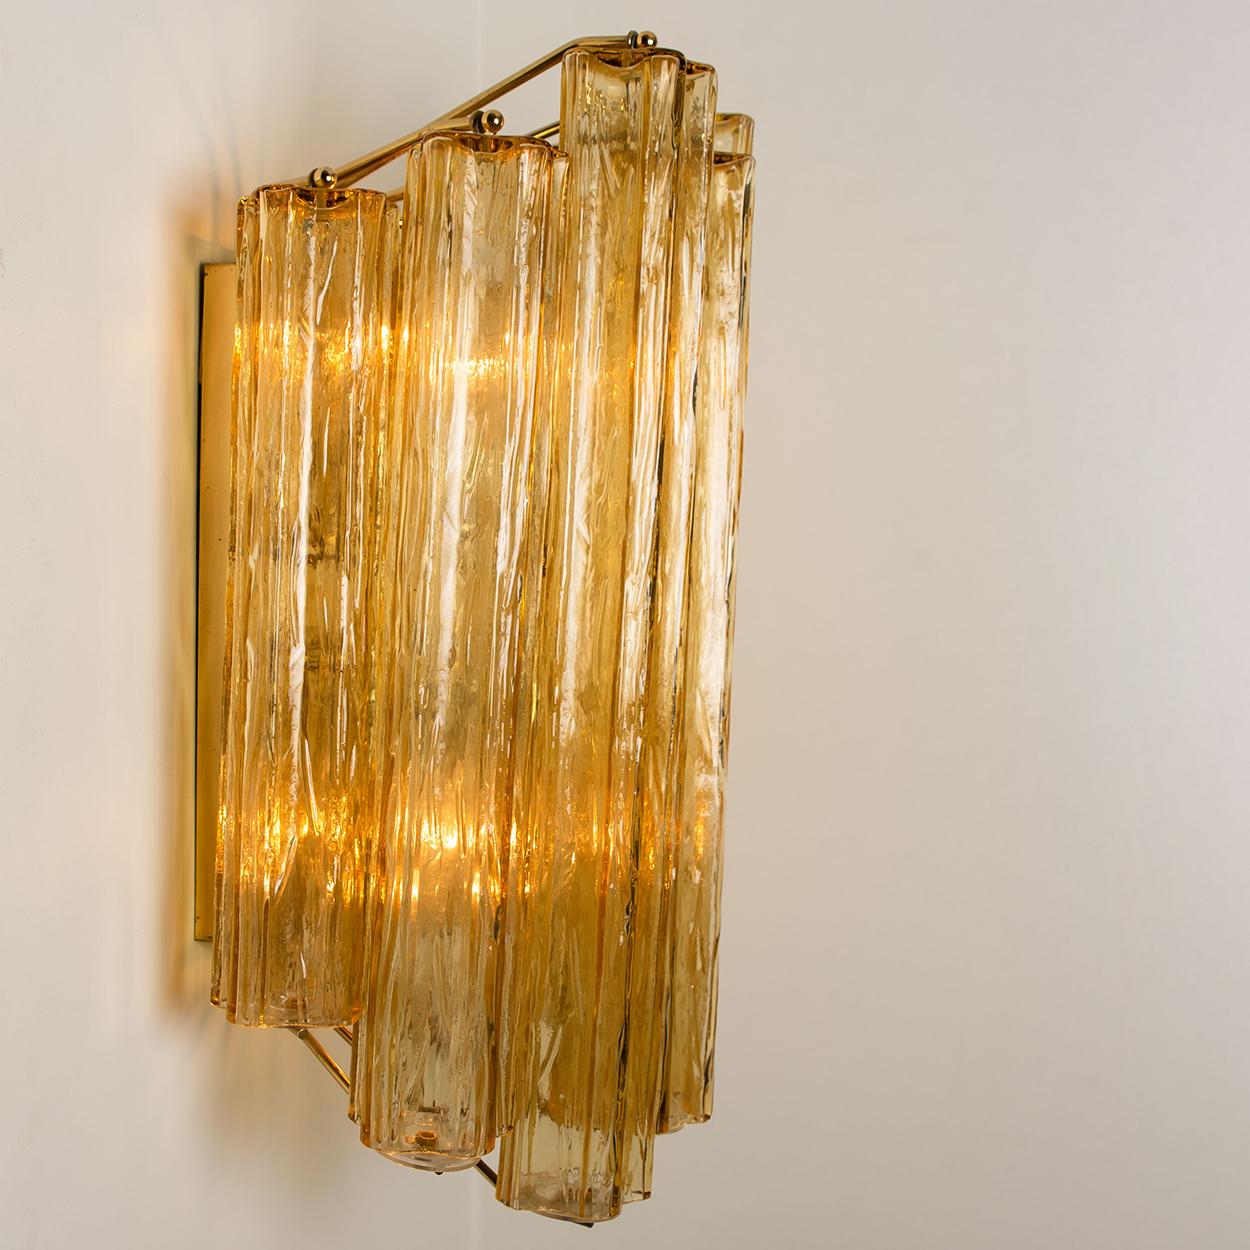 Mid-Century Modern 1 of the 3 Extra Large Wall Sconces or Wall Lights Murano Glass, Barovier & Toso